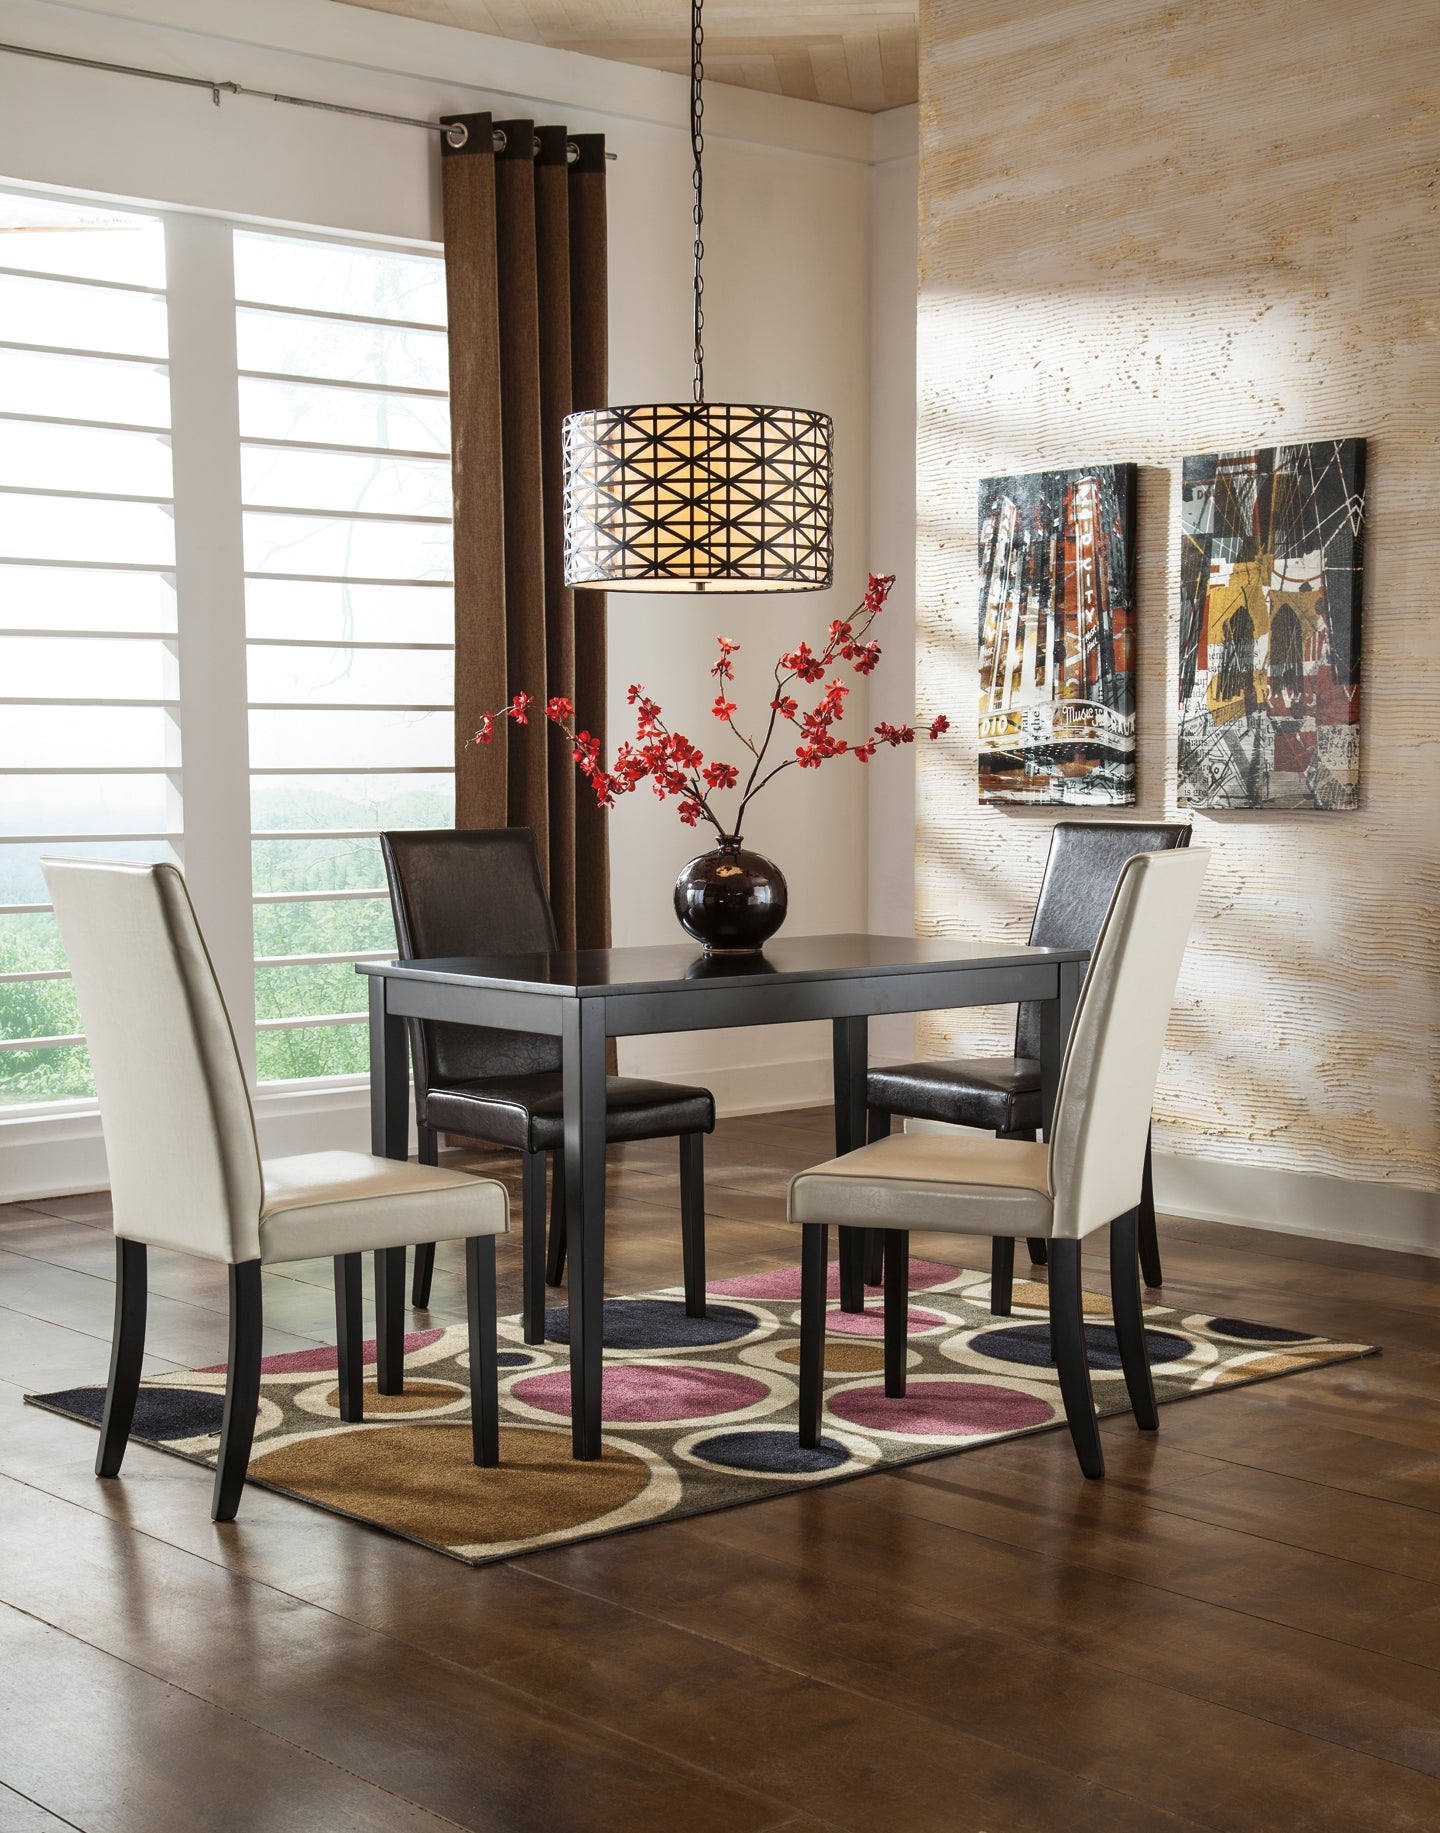 Kimonte Dining Table and 4 Chairs Wilson Furniture (OH)  in Bridgeport, Ohio. Serving Bridgeport, Yorkville, Bellaire, & Avondale